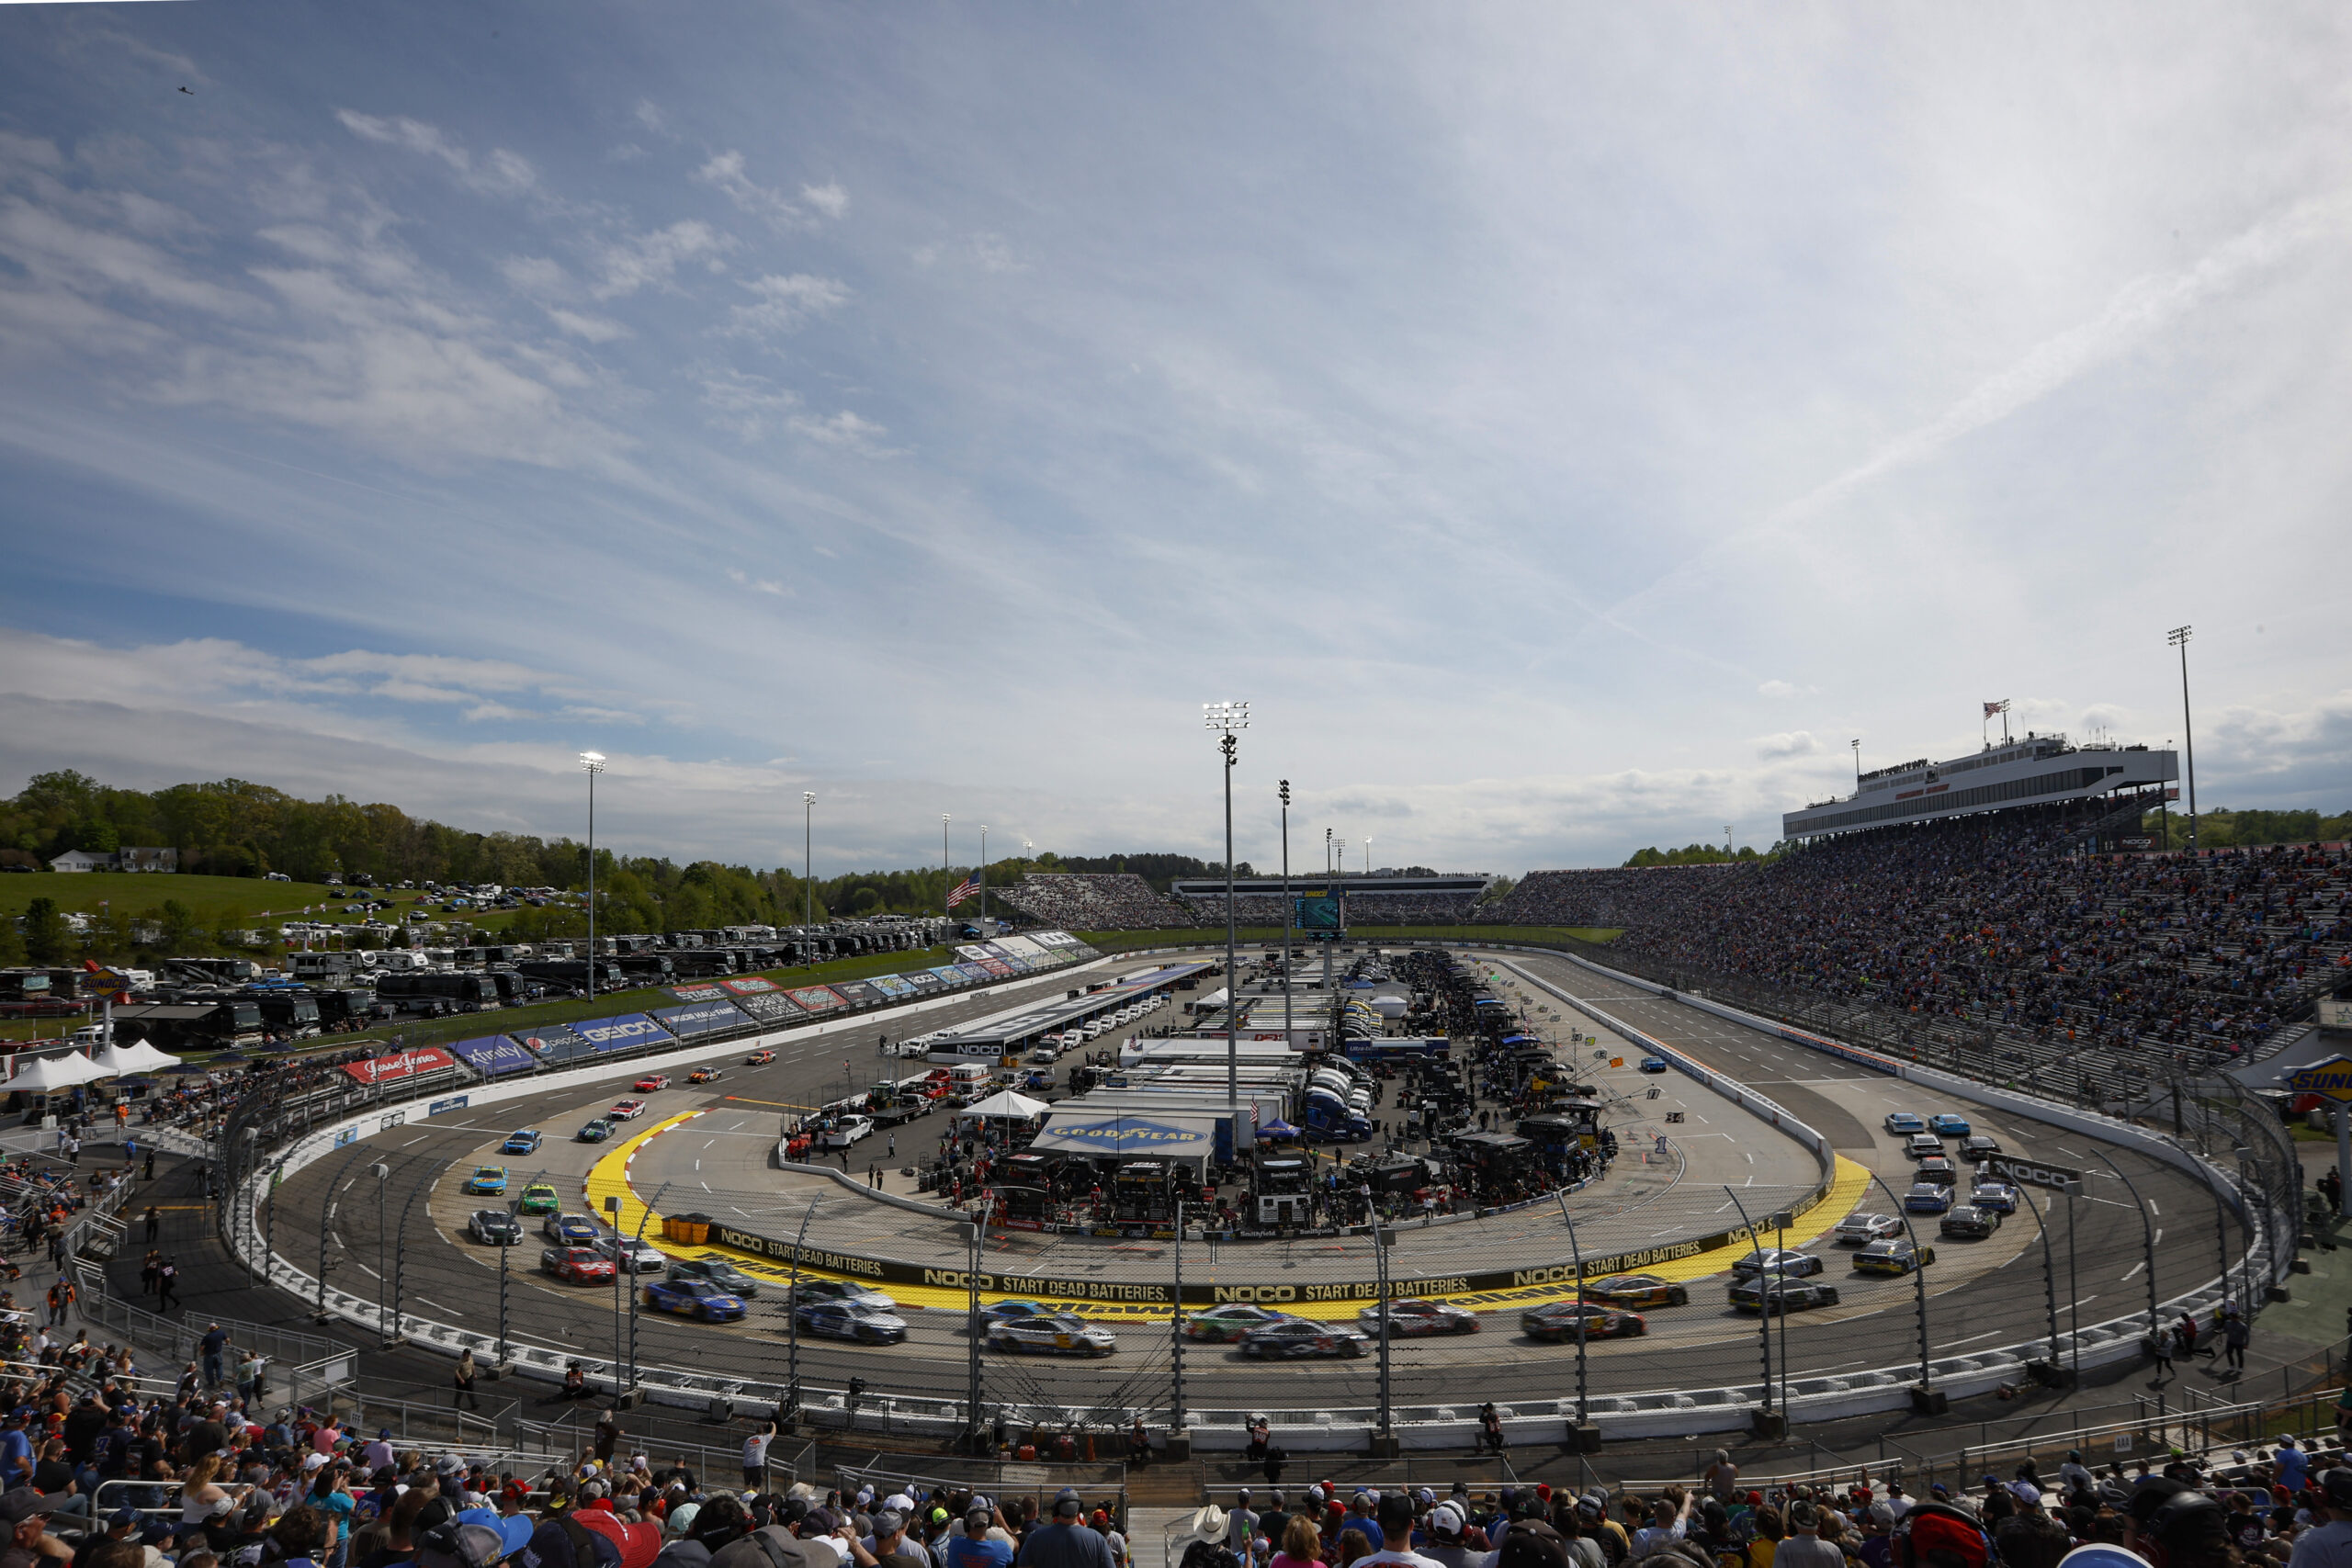 Who Will Make their Championship Voice Heard at Martinsville?